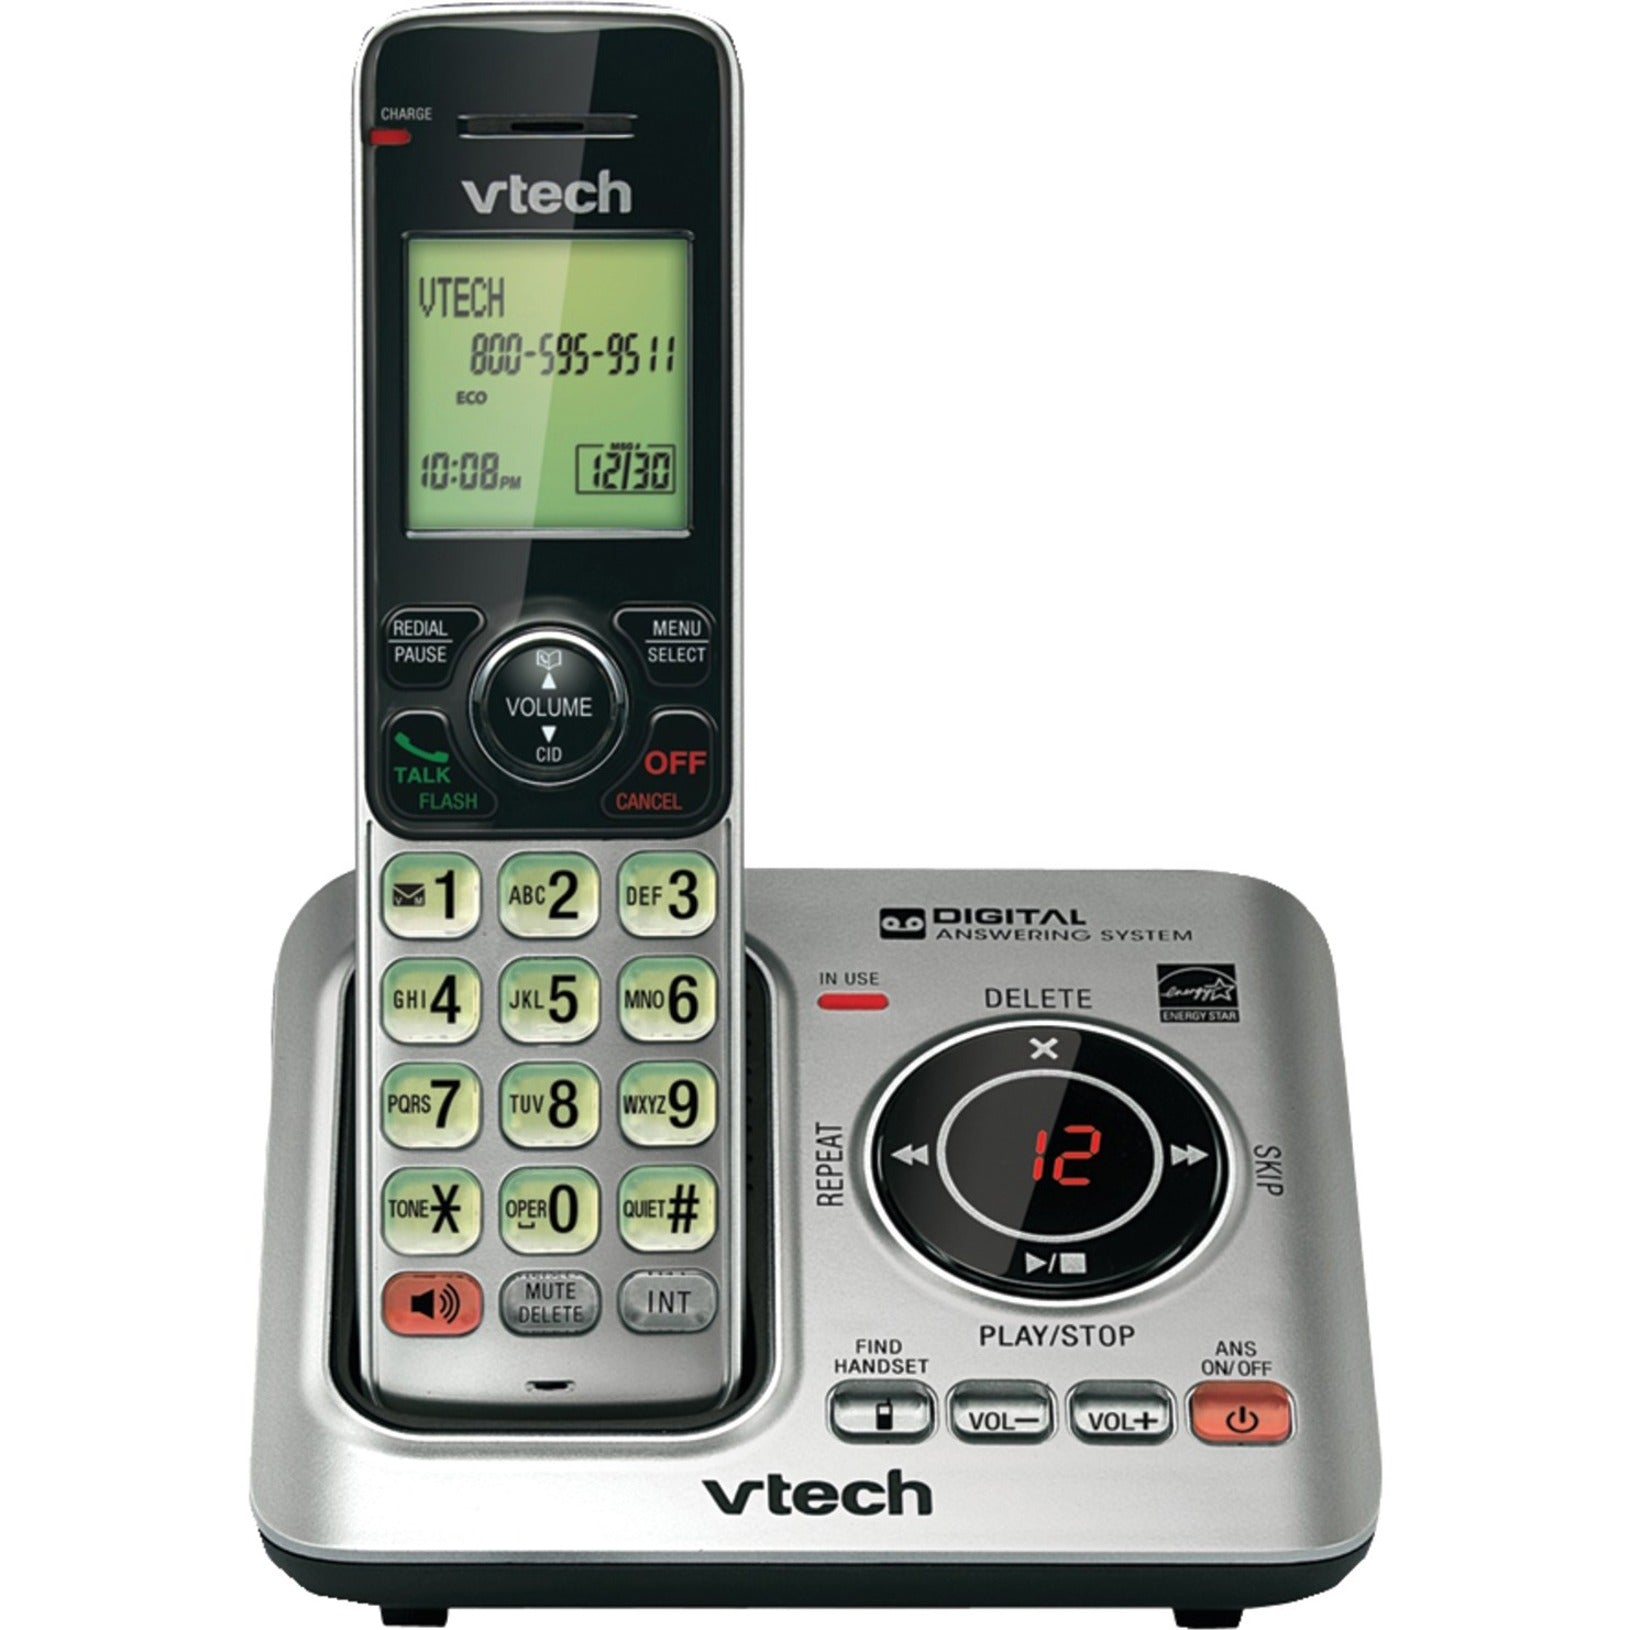 VTech VTCS6629 Cordless Phone CS6629 DECT 6.0, Caller ID/Call Waiting, Answering System, Silver